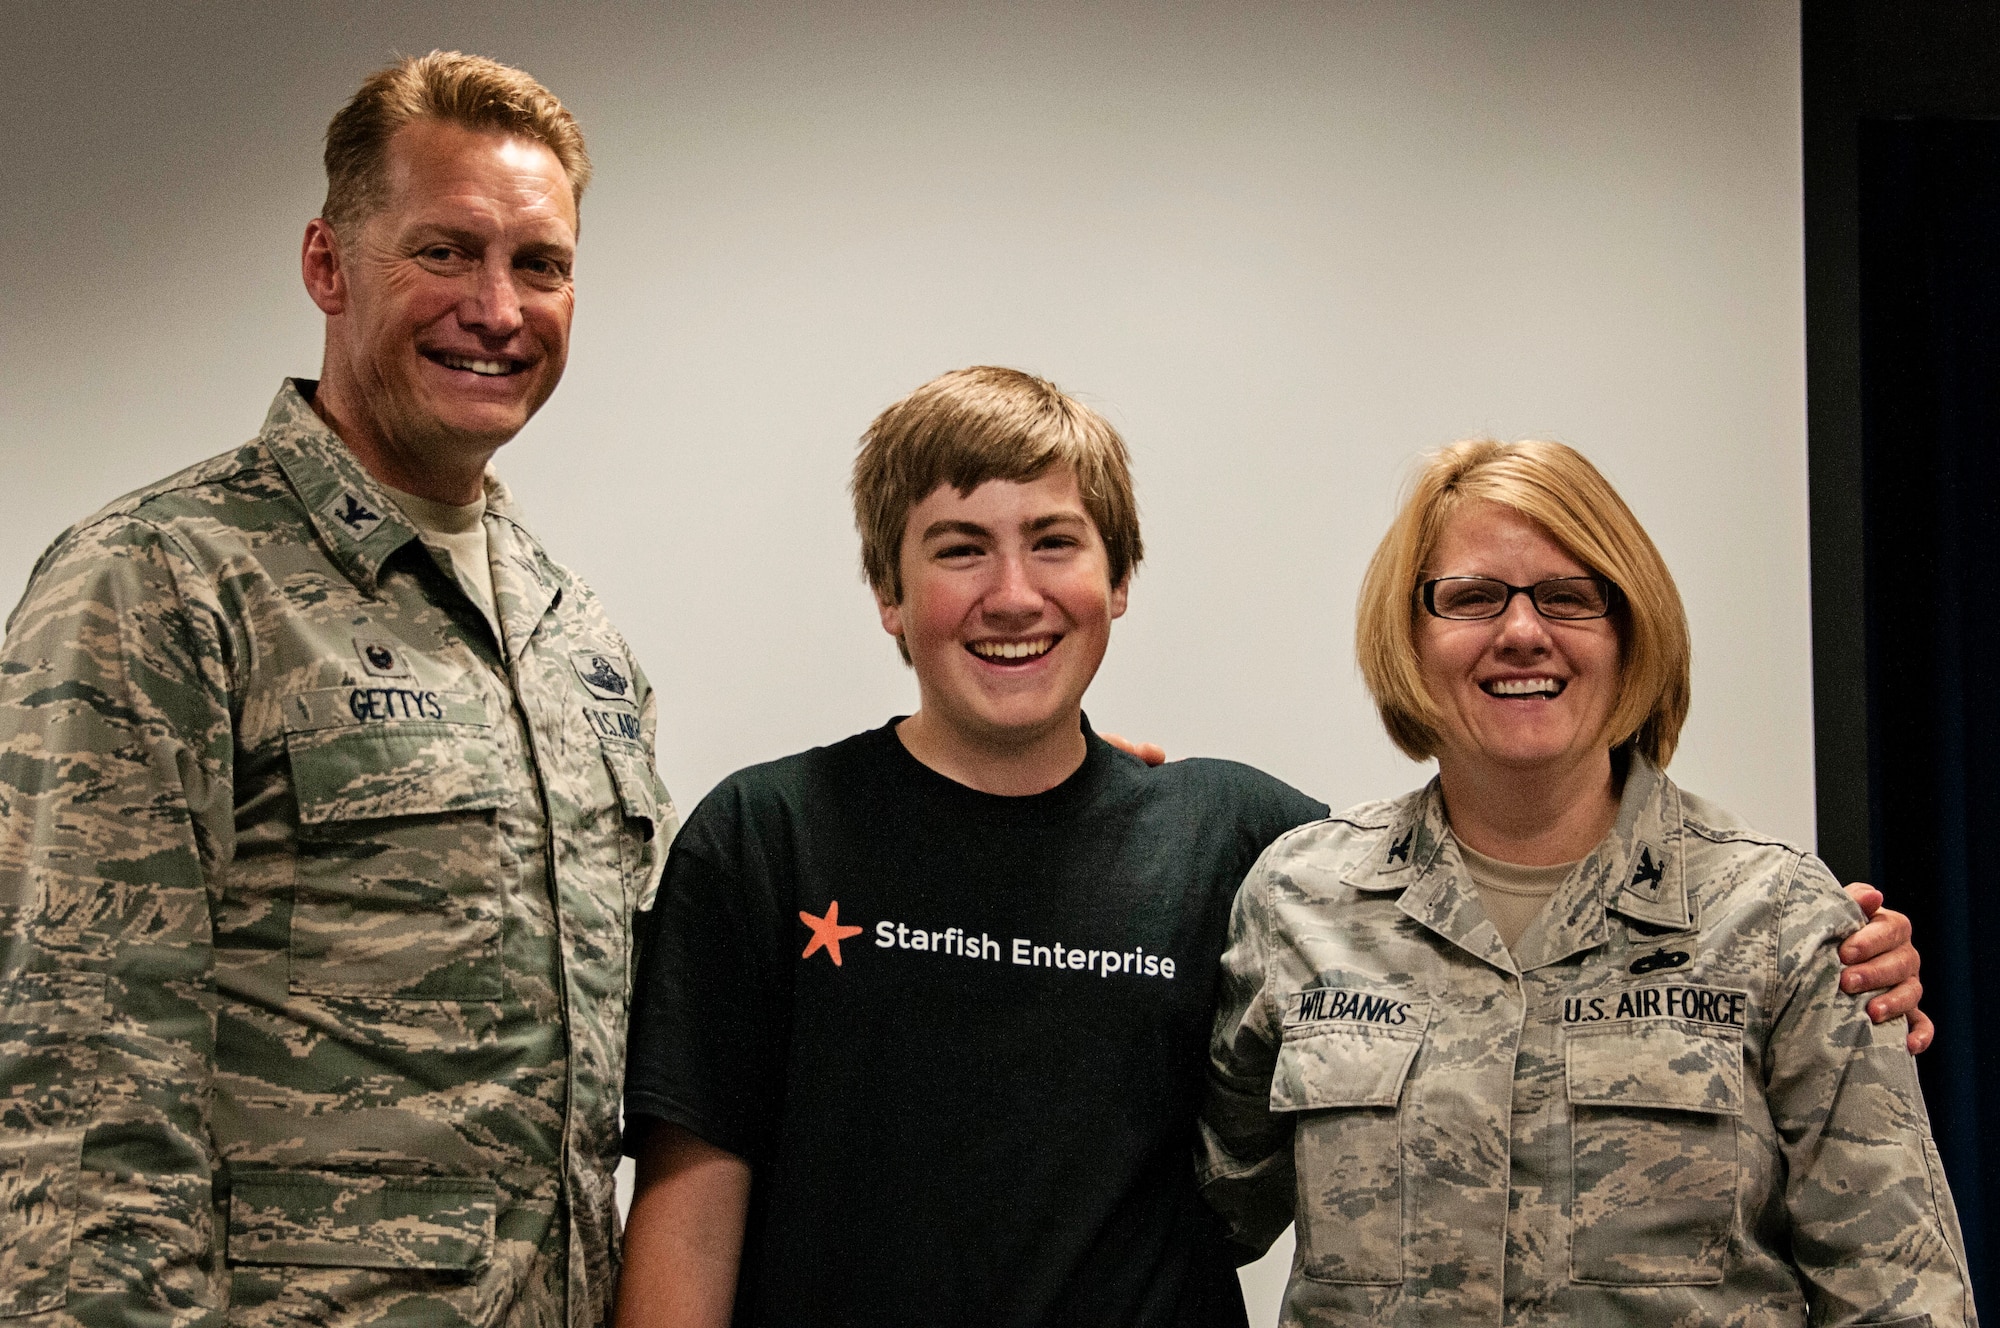 Col. Blake Gettys, commander of the 176th Wing, Alaska Air National Guard, poses for a photo with Brice Wilbanks and his mother, Col. Patty Wilbanks, commander of the 176th Mission Support Group, after being presented with a letter of thanks from Lt. Gen. Stanley Clarke III, director of the Air National Guard, at a ceremony on Joint Base Elmendorf-Richardson, Alaska, Aug. 14. Brice was presented the letter in recognition of being the recipient of the 2015 Air National Guard Youth of the Year award. (U.S. Air National Guard photo by Staff Sgt. Edward Eagerton/released)